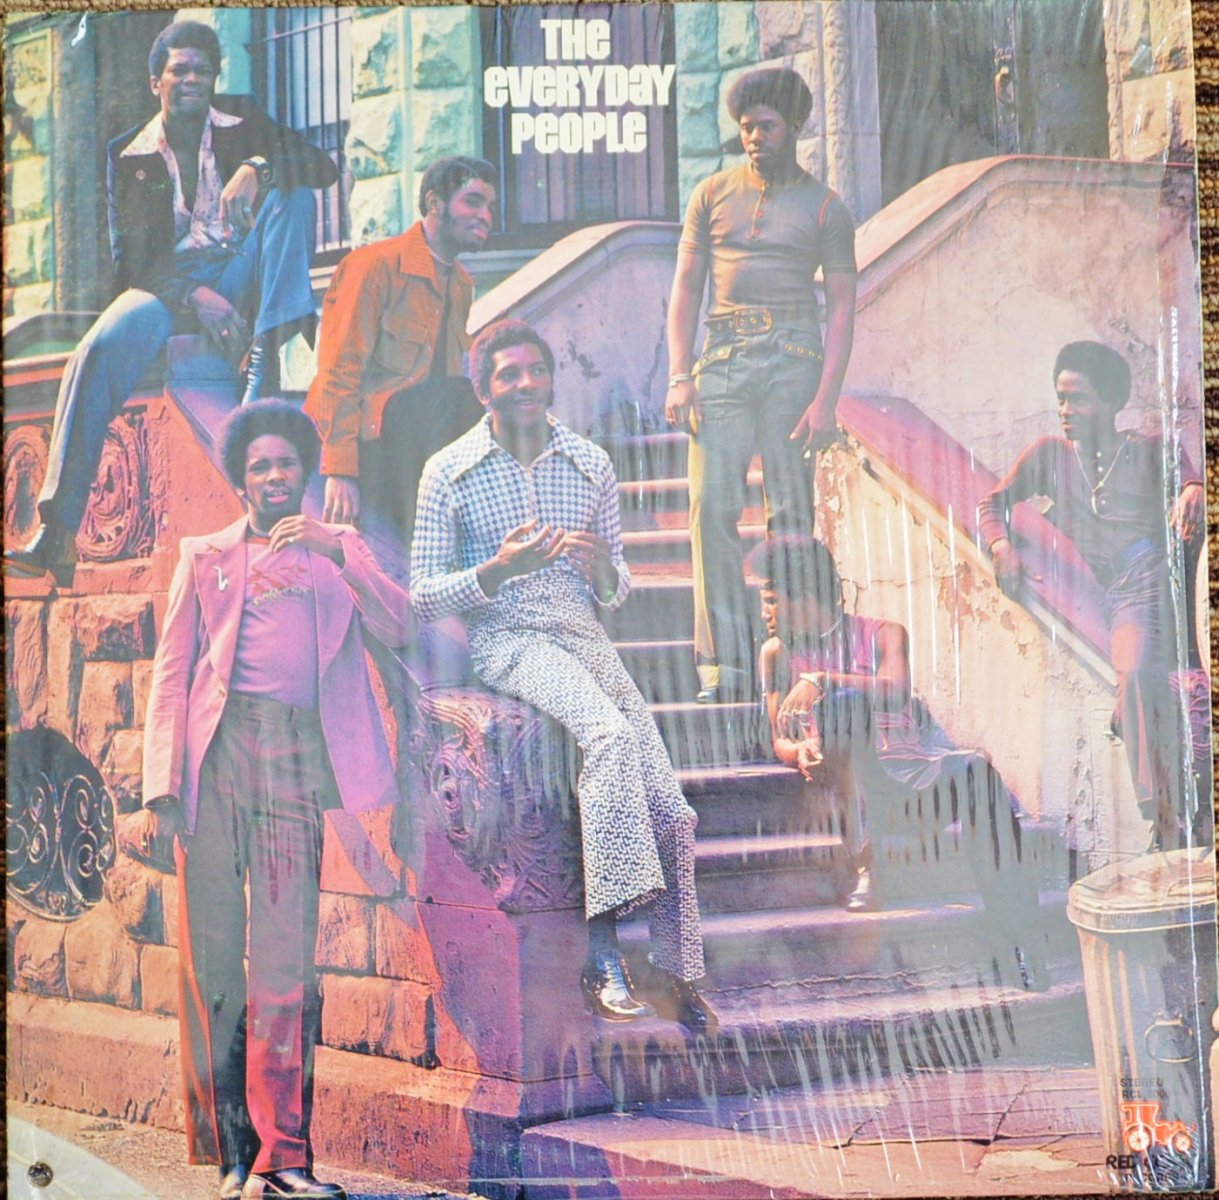 THE EVERYDAY PEOPLE ‎/ THE EVERYDAY PEOPLE (LP)